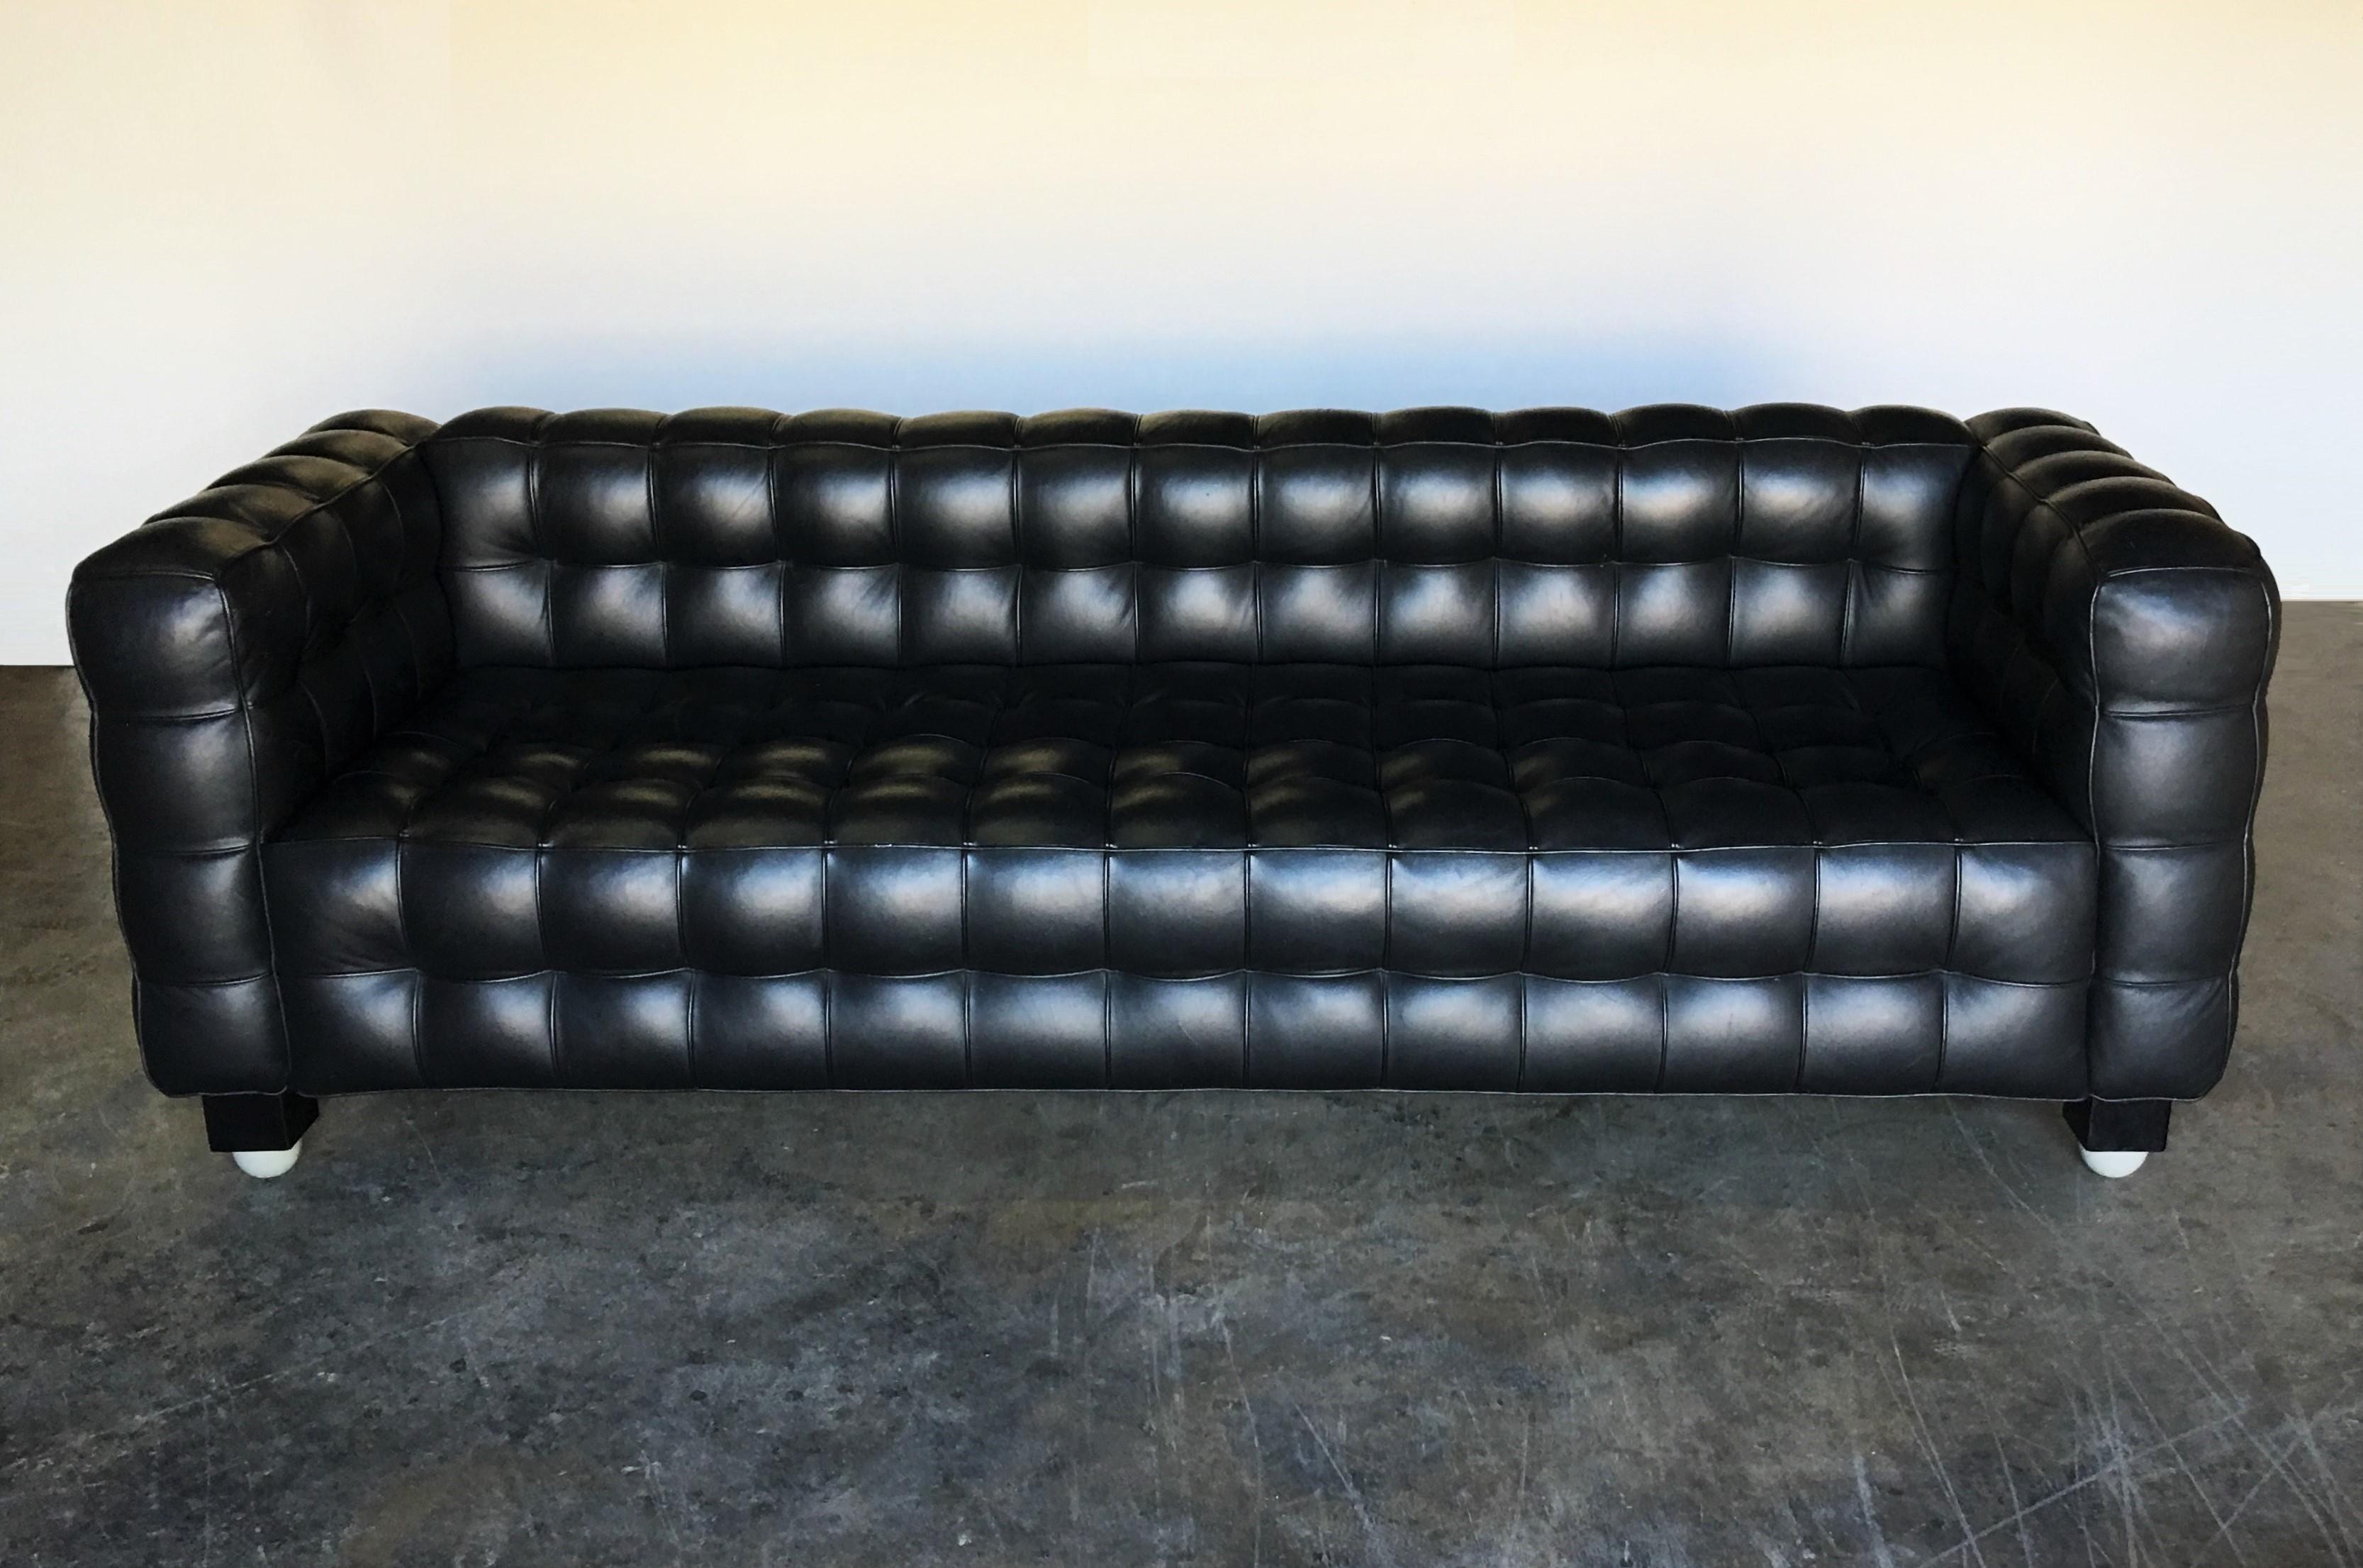 Great geometric sofa designed by Josef Hoffmann, manufactured by Wittmann, Austria, circa 1999. The sofa was designed in 1910 and later Wittmann took it into production. This sofa is made of black leather and is quality finished all-over. Made of